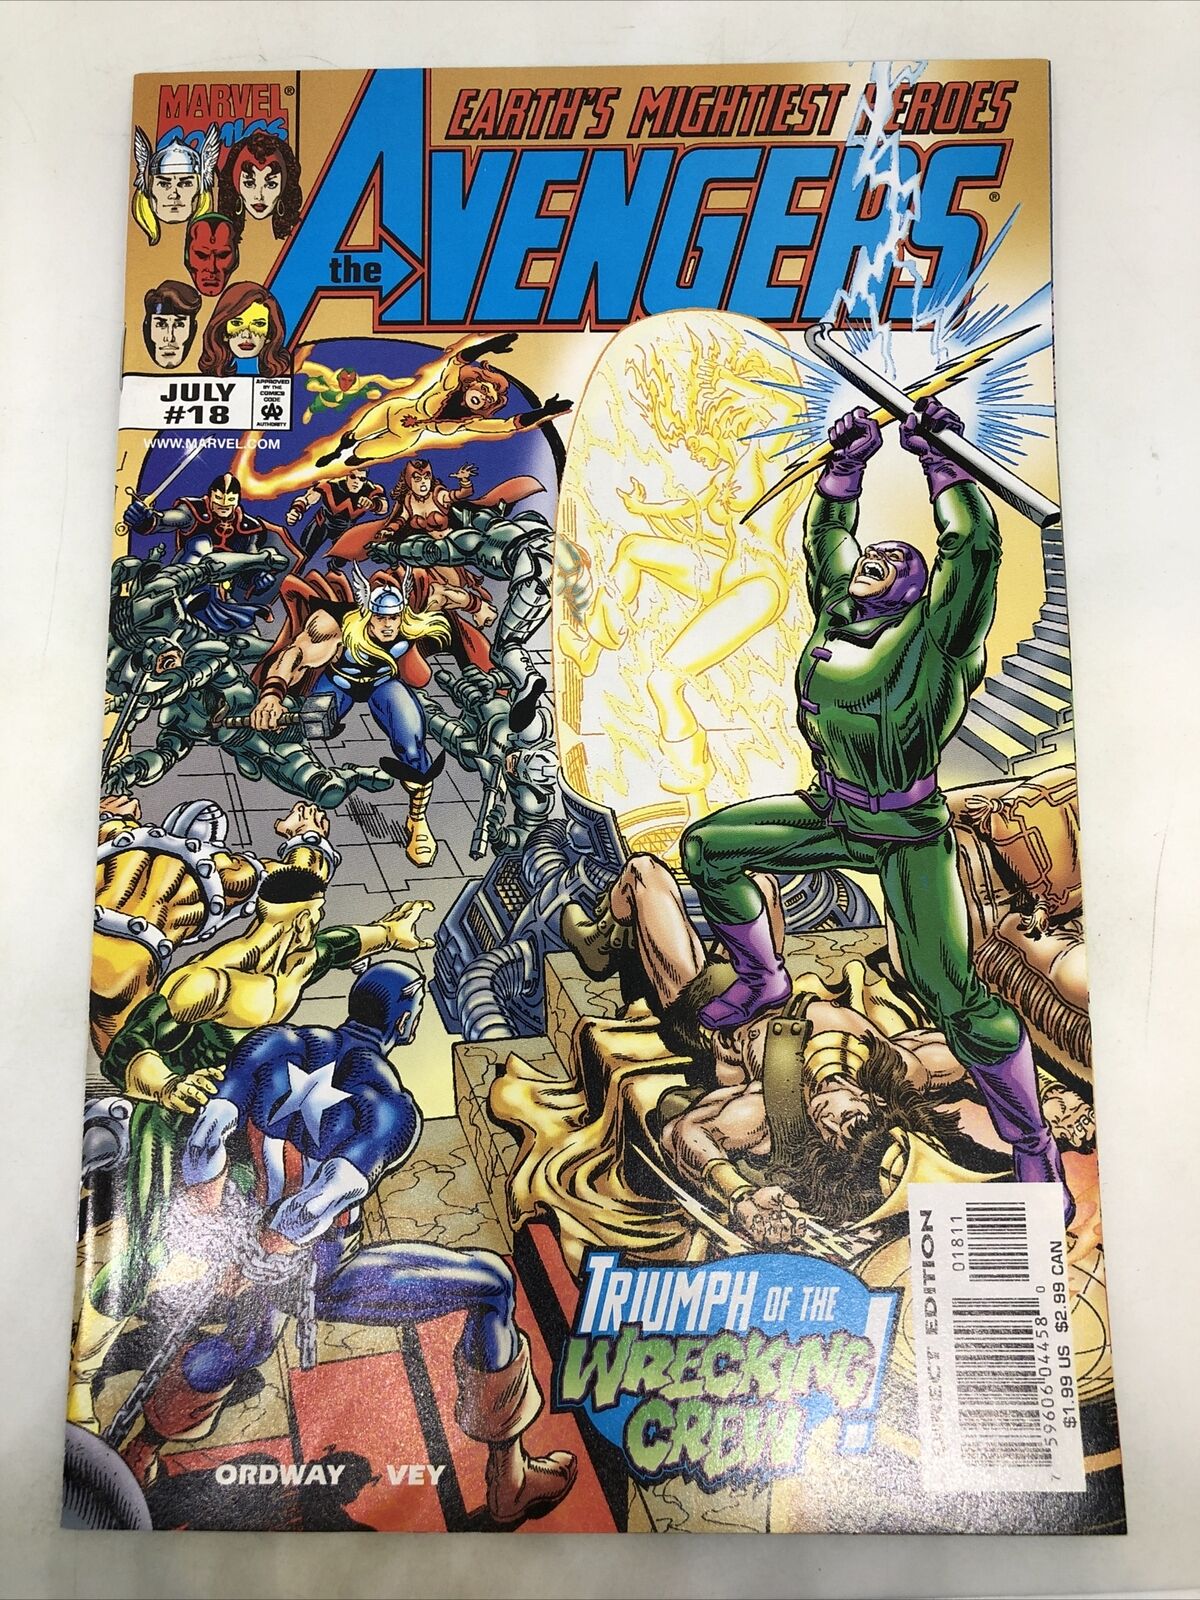 Avengers #18 July 1999, Triumph of the Wrecking Crew